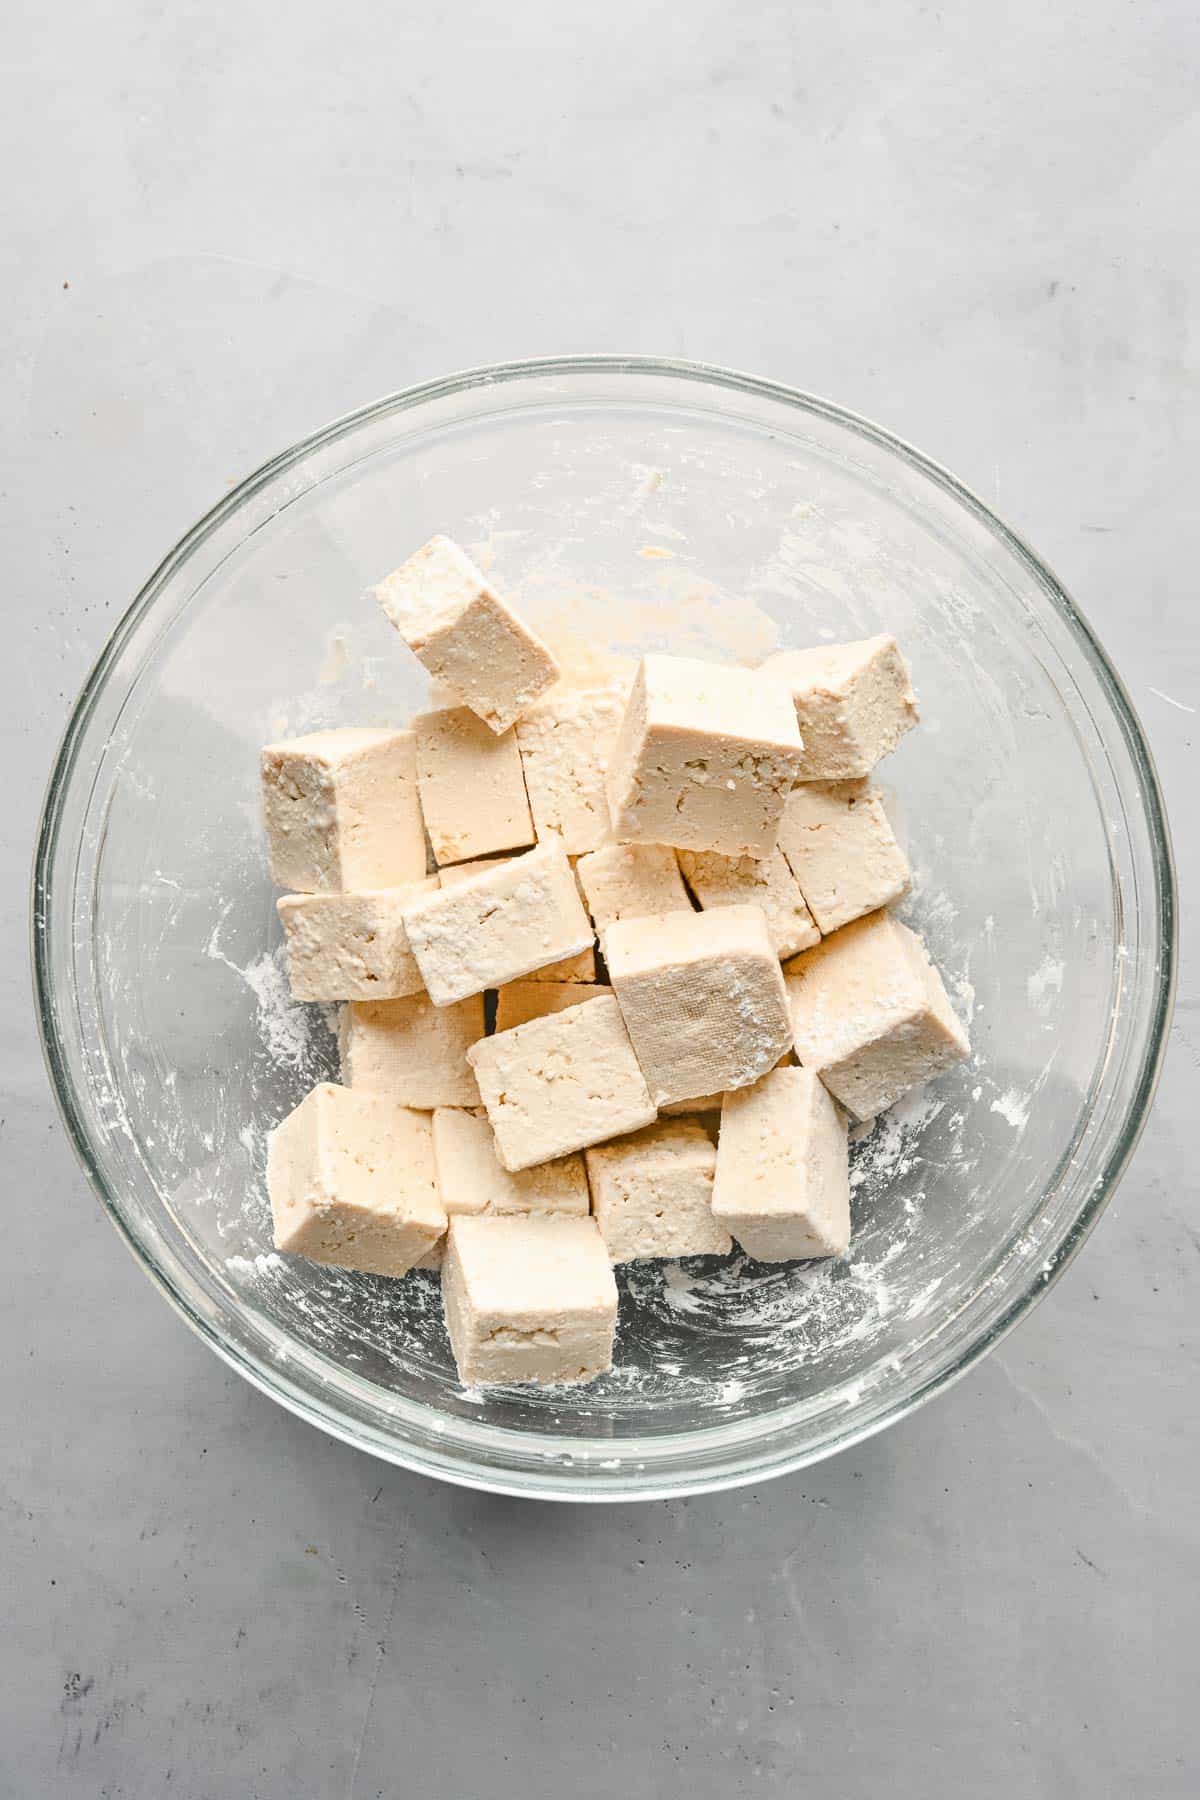 Cubed tofu tossed with cornstarch in a glass bowl.